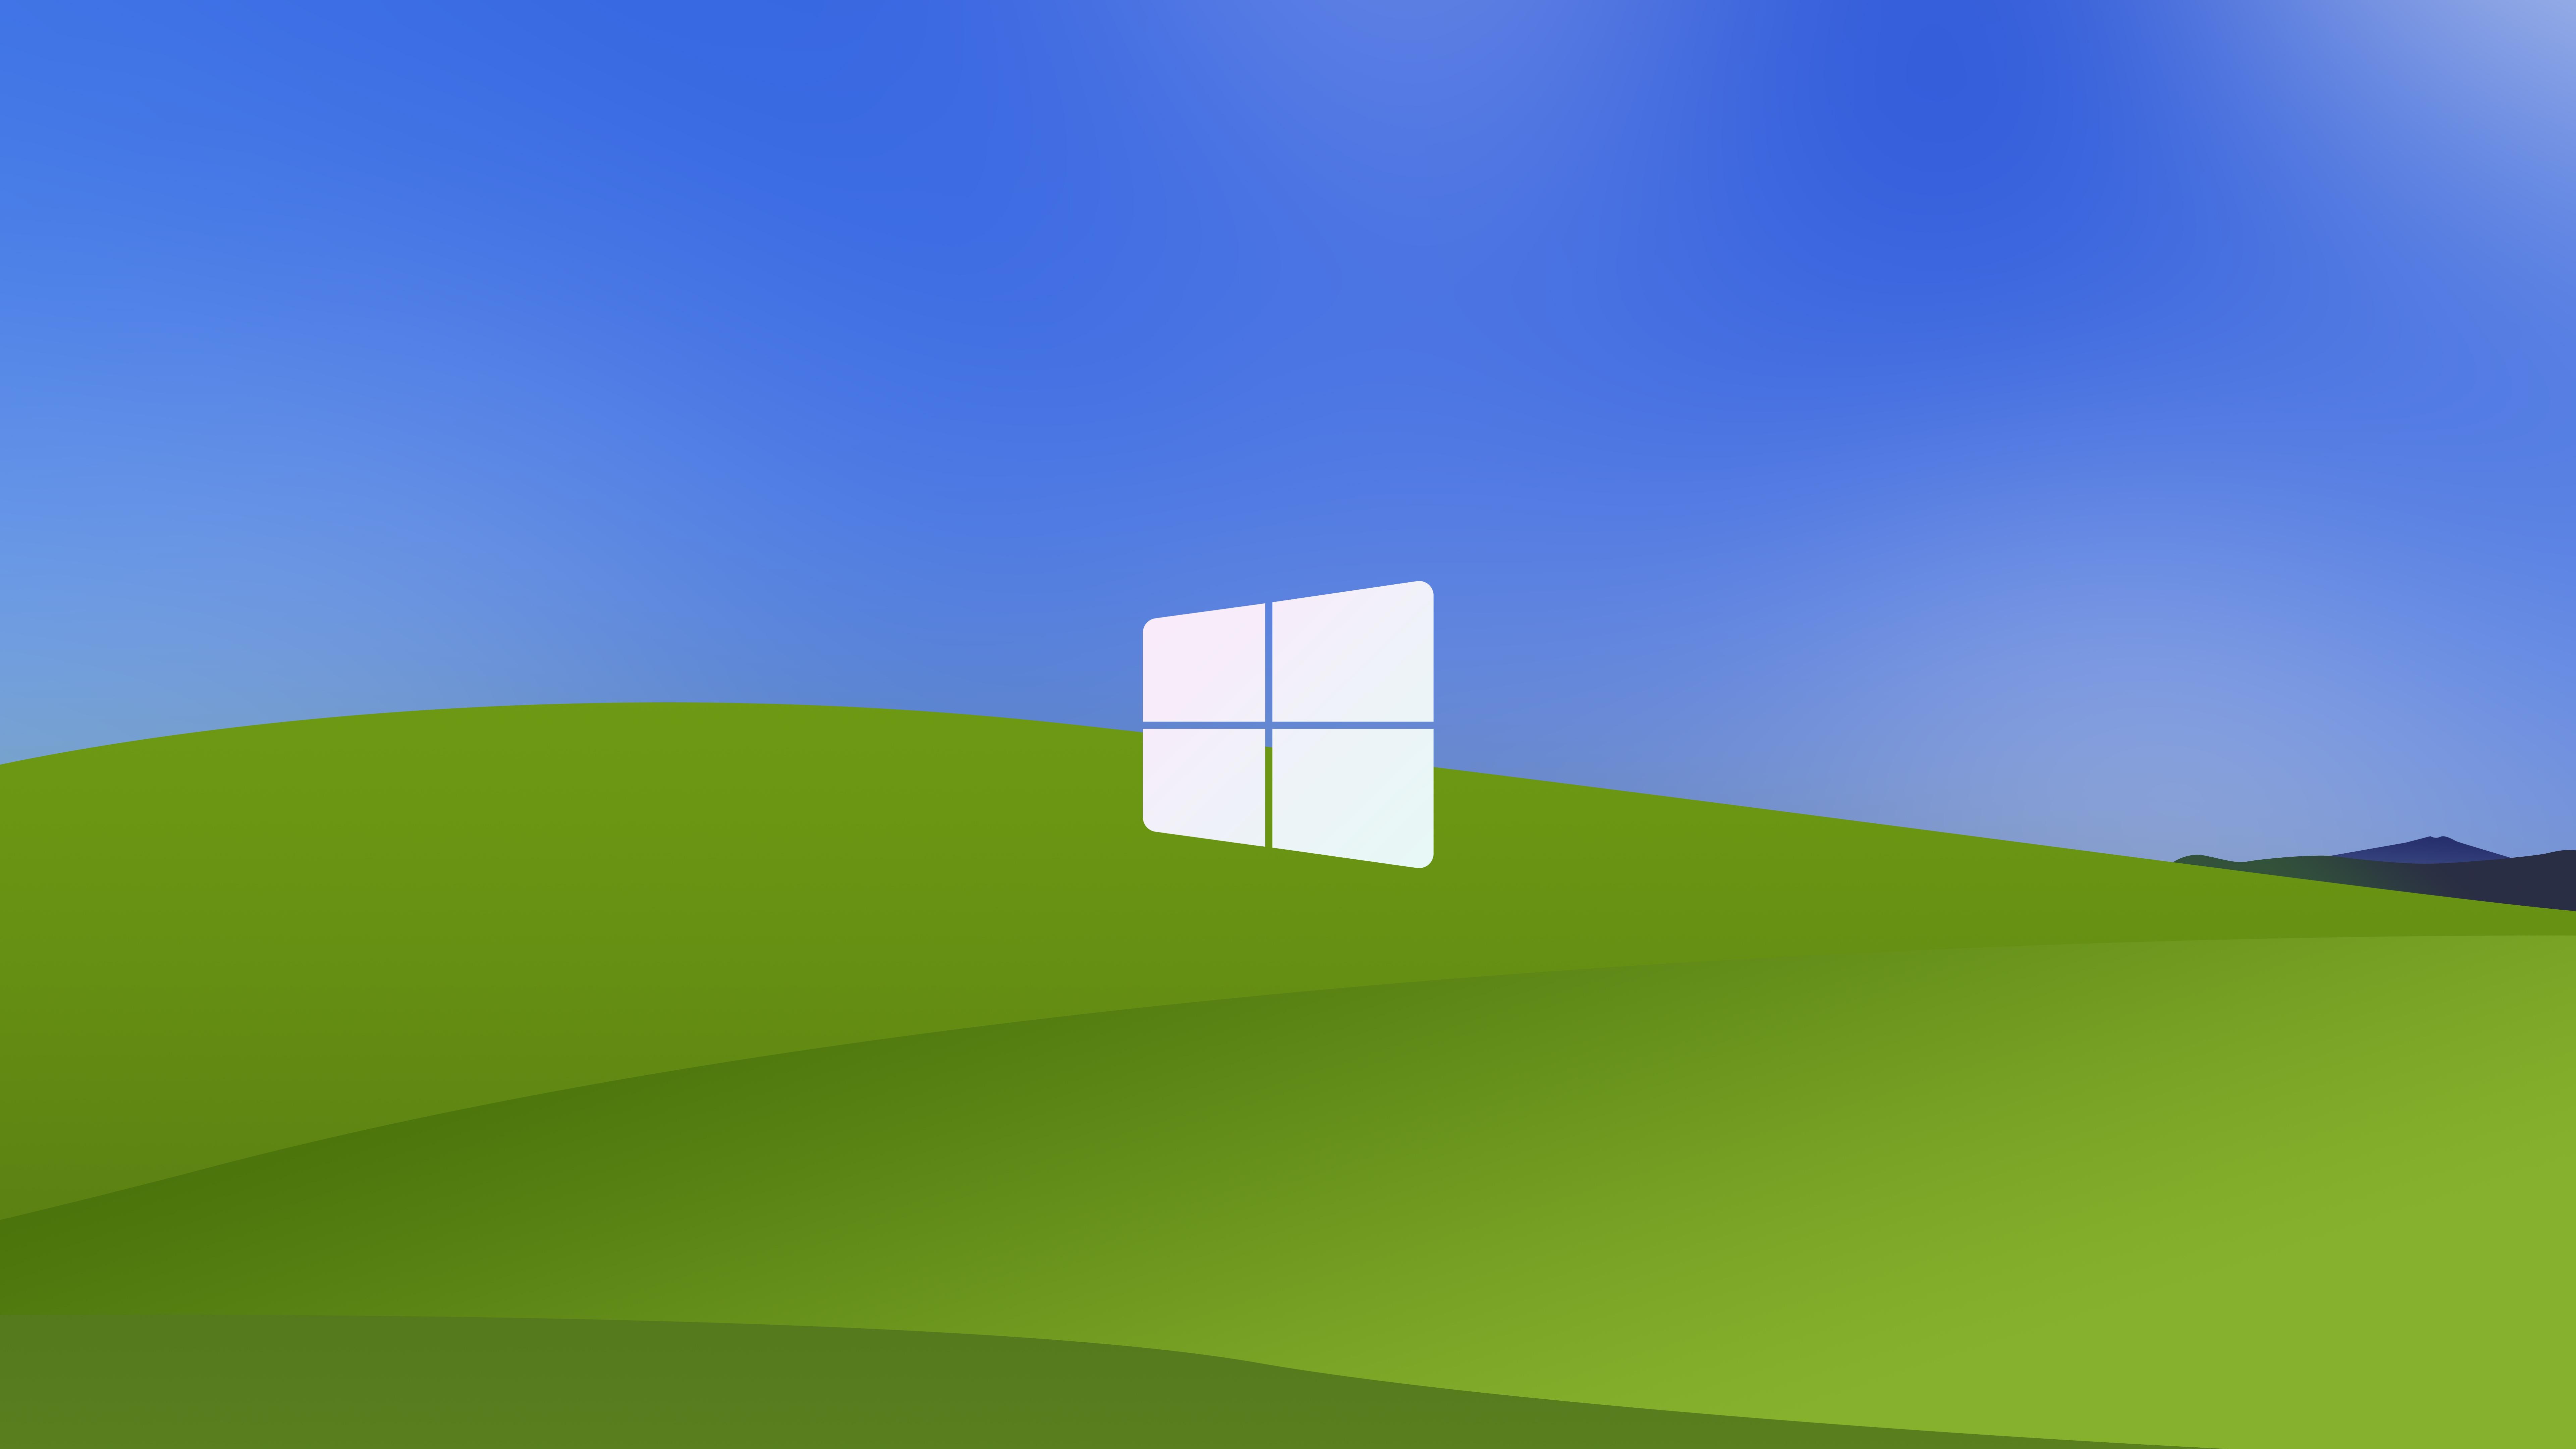 Today I stumbled upon Microsoft's 4K rendering of the Windows XP wallpaper